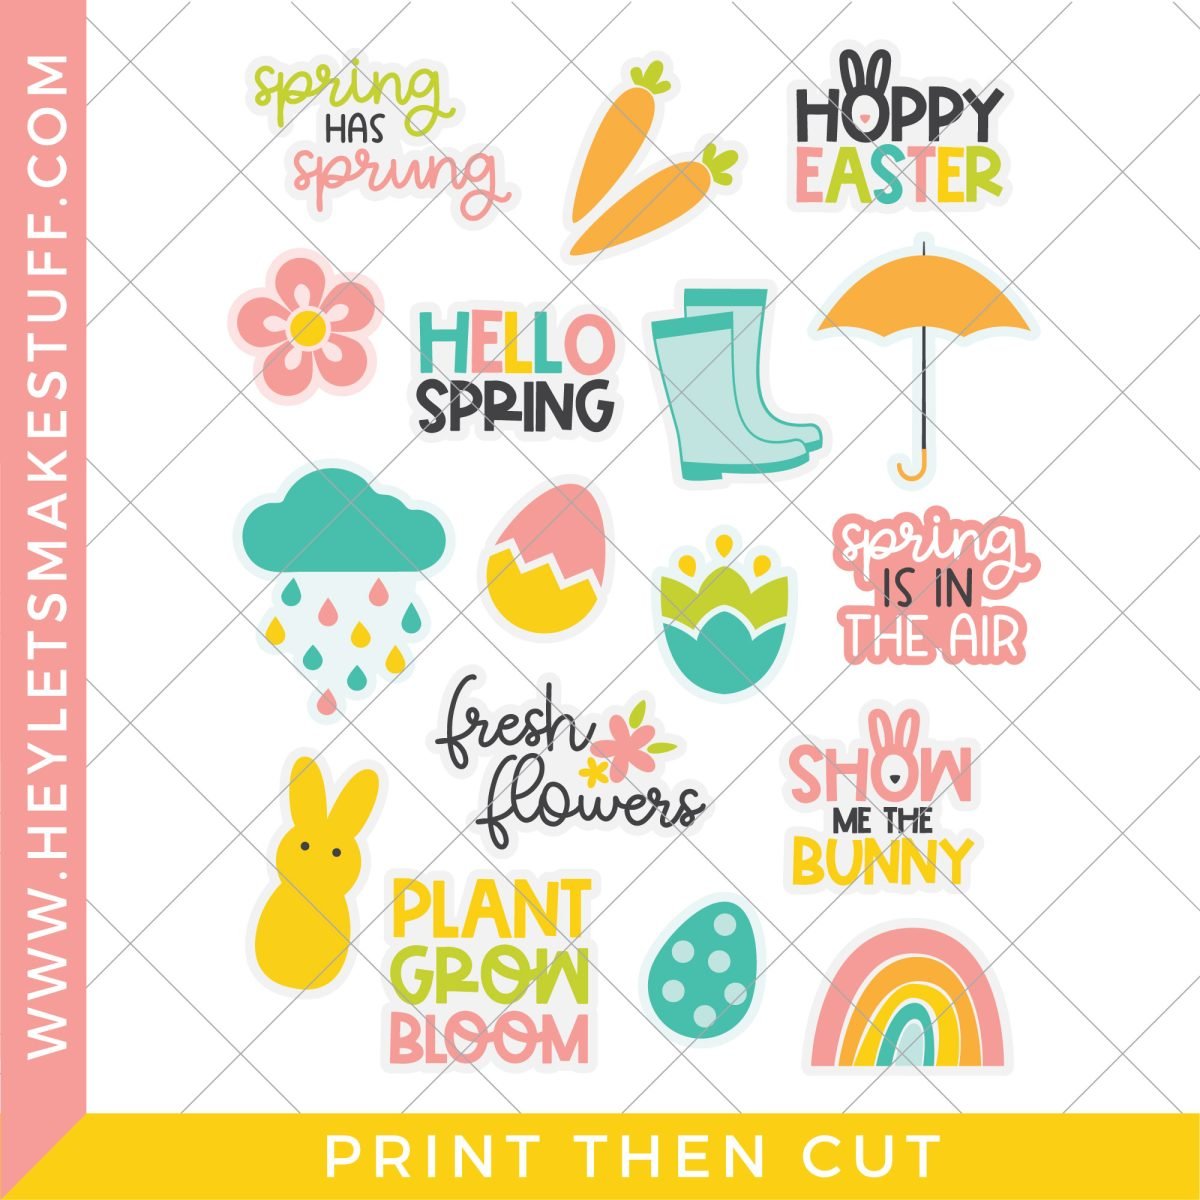 Spring and Easter stickers security template image.